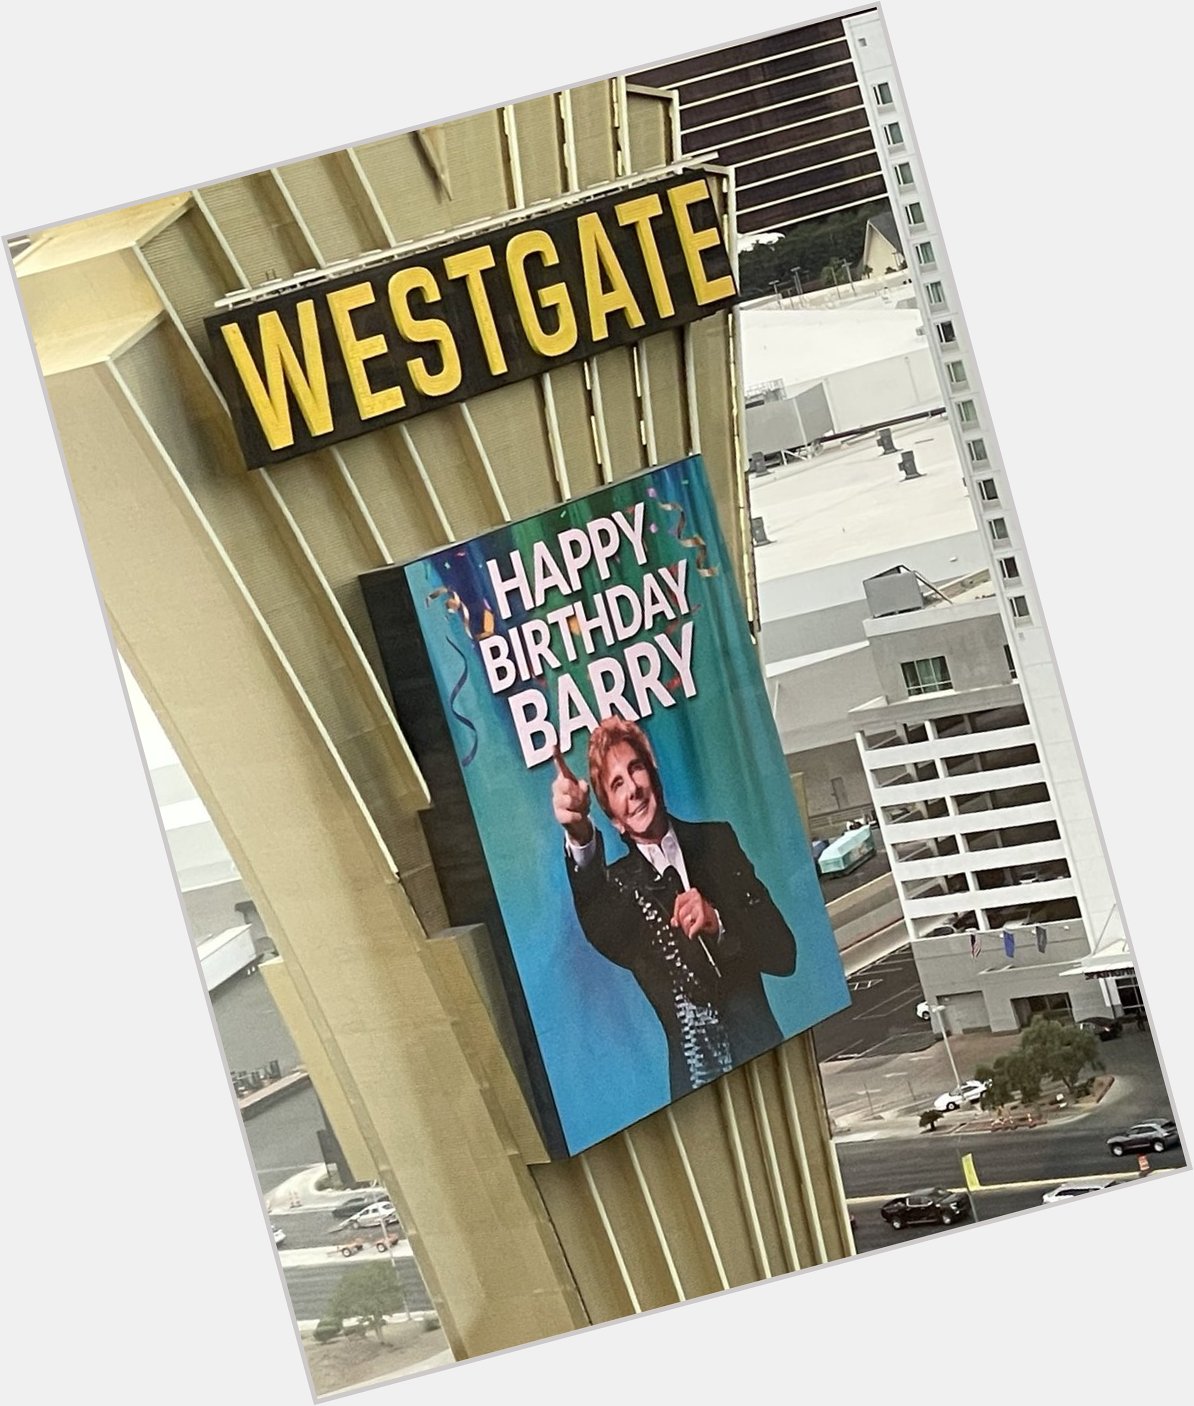 Happy 80th birthday to Barry Manilow! What s he doing tonight? A show at the Westgate in Vegas! 